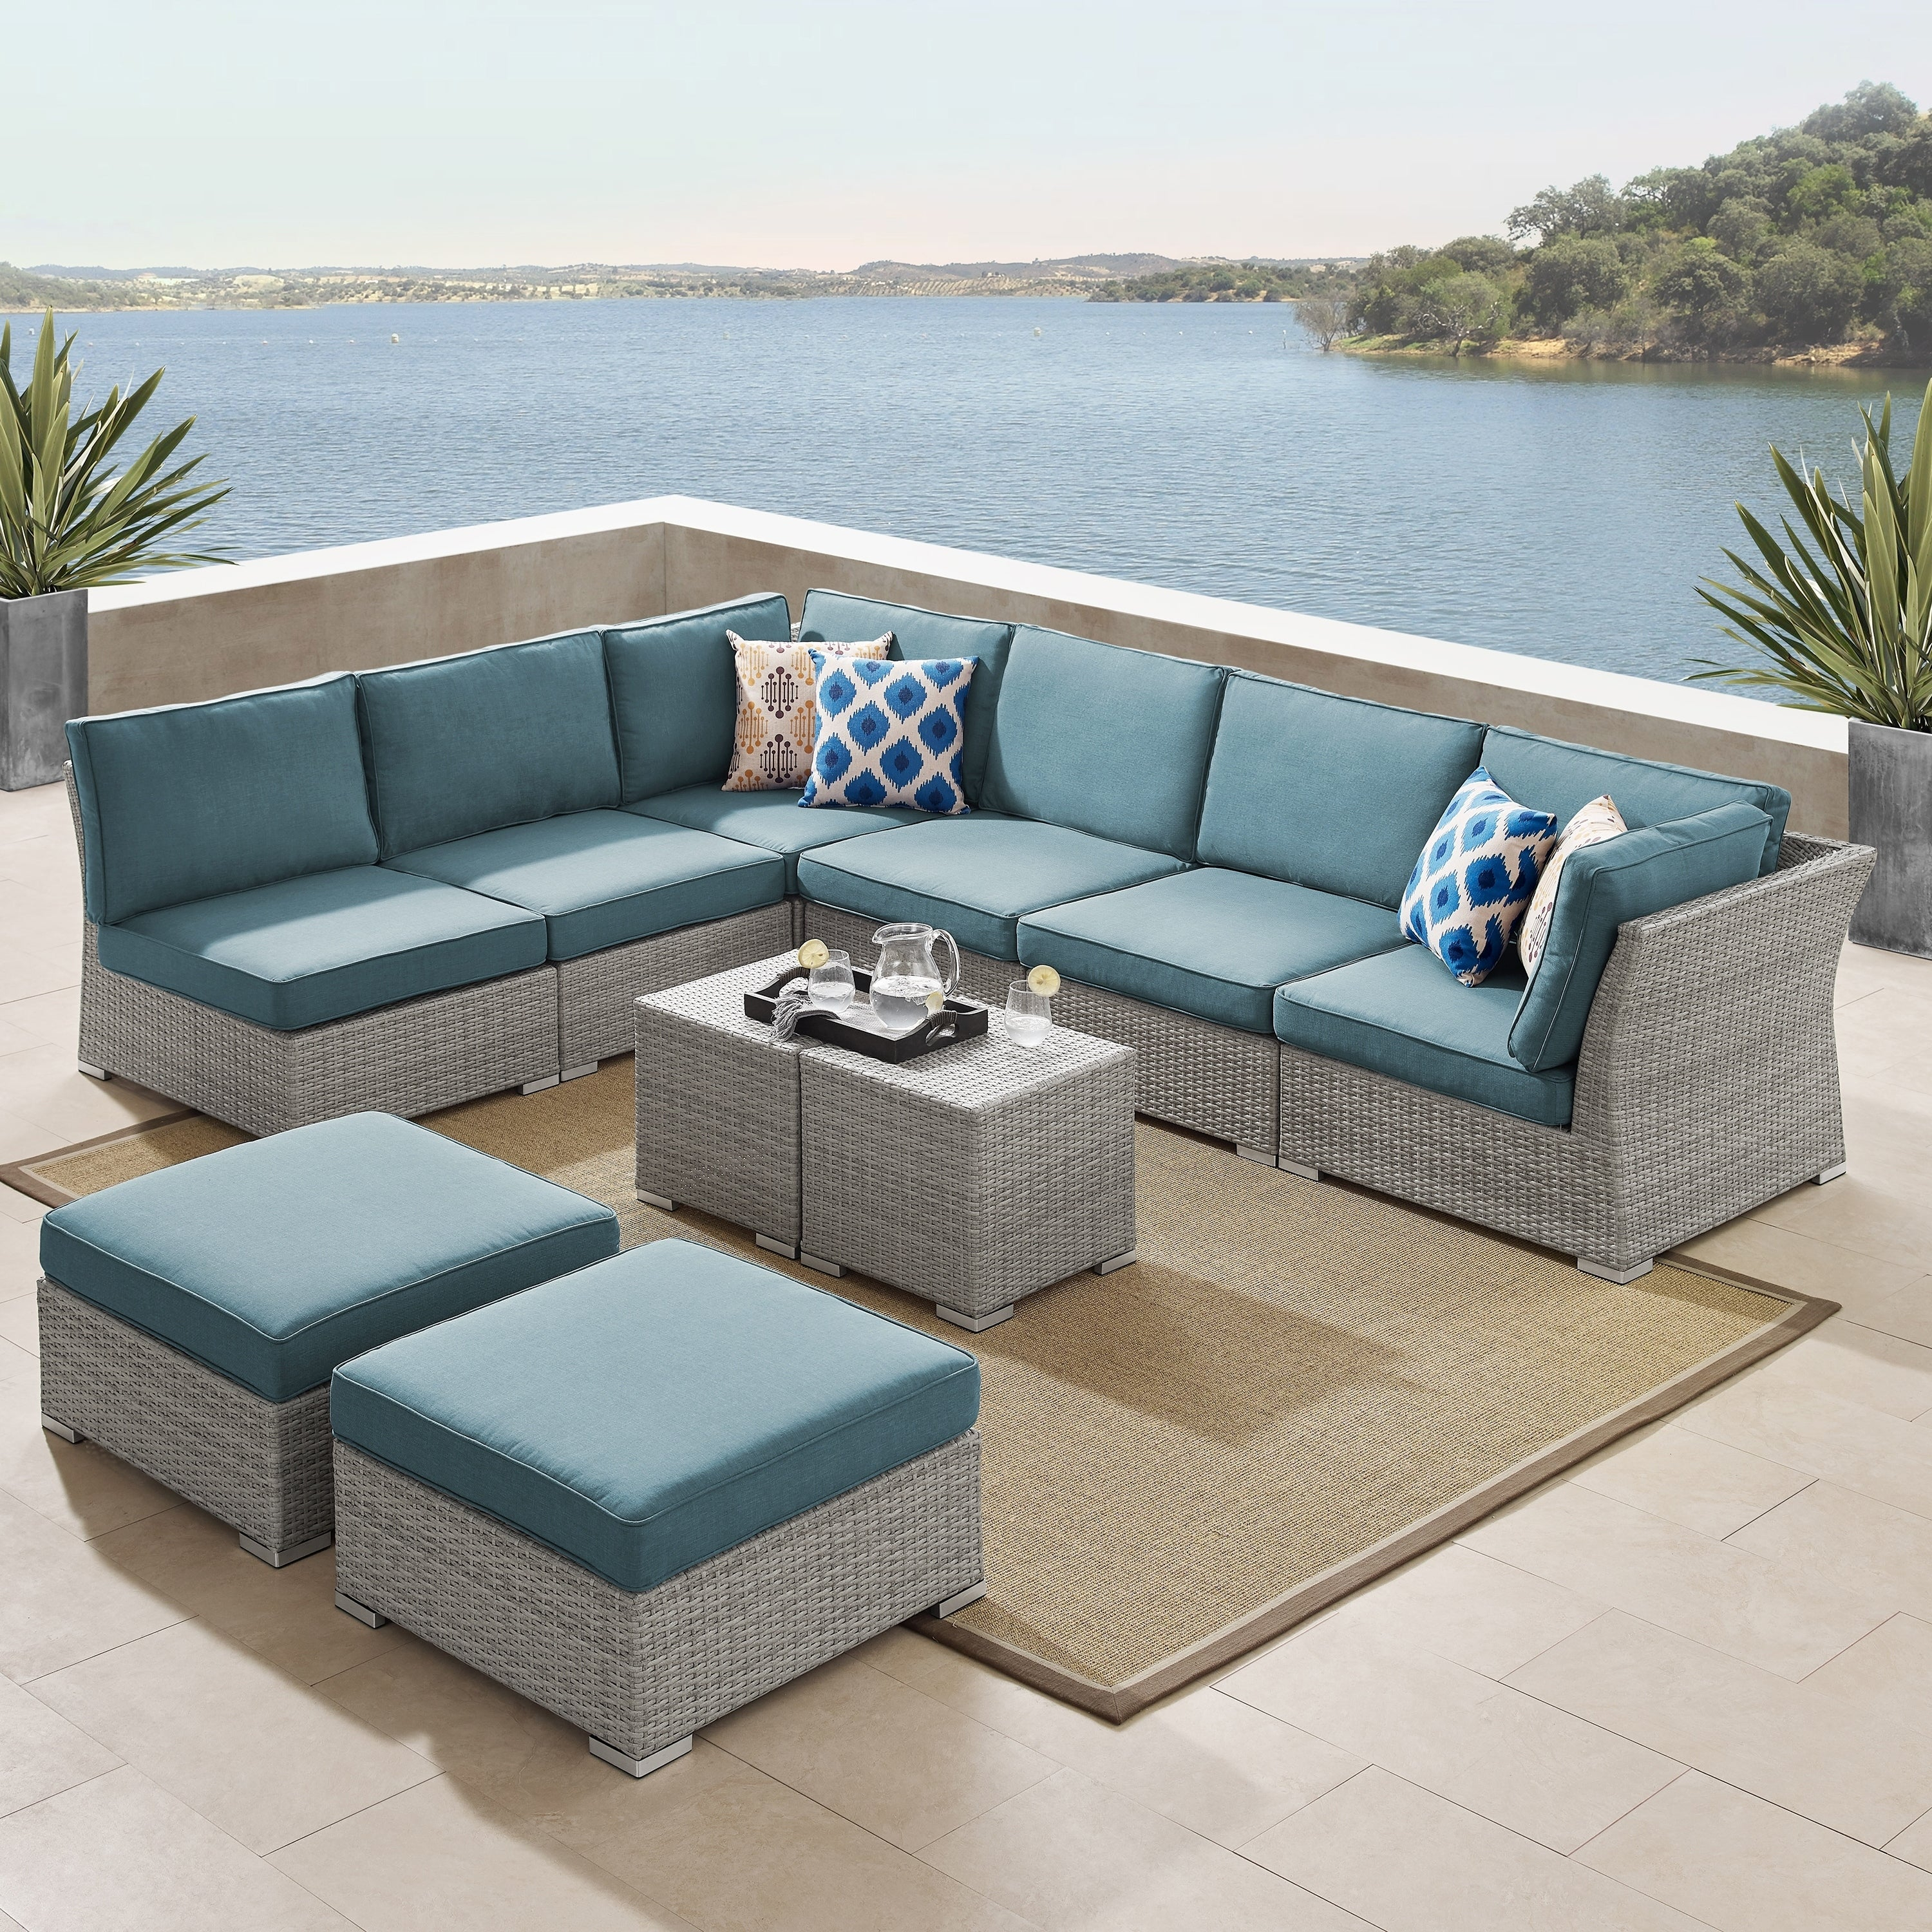 Corvus 10 Piece Grey Wicker Patio Sectional Conversation Sofa Set With Blue Cushions inside sizing 3000 X 3000